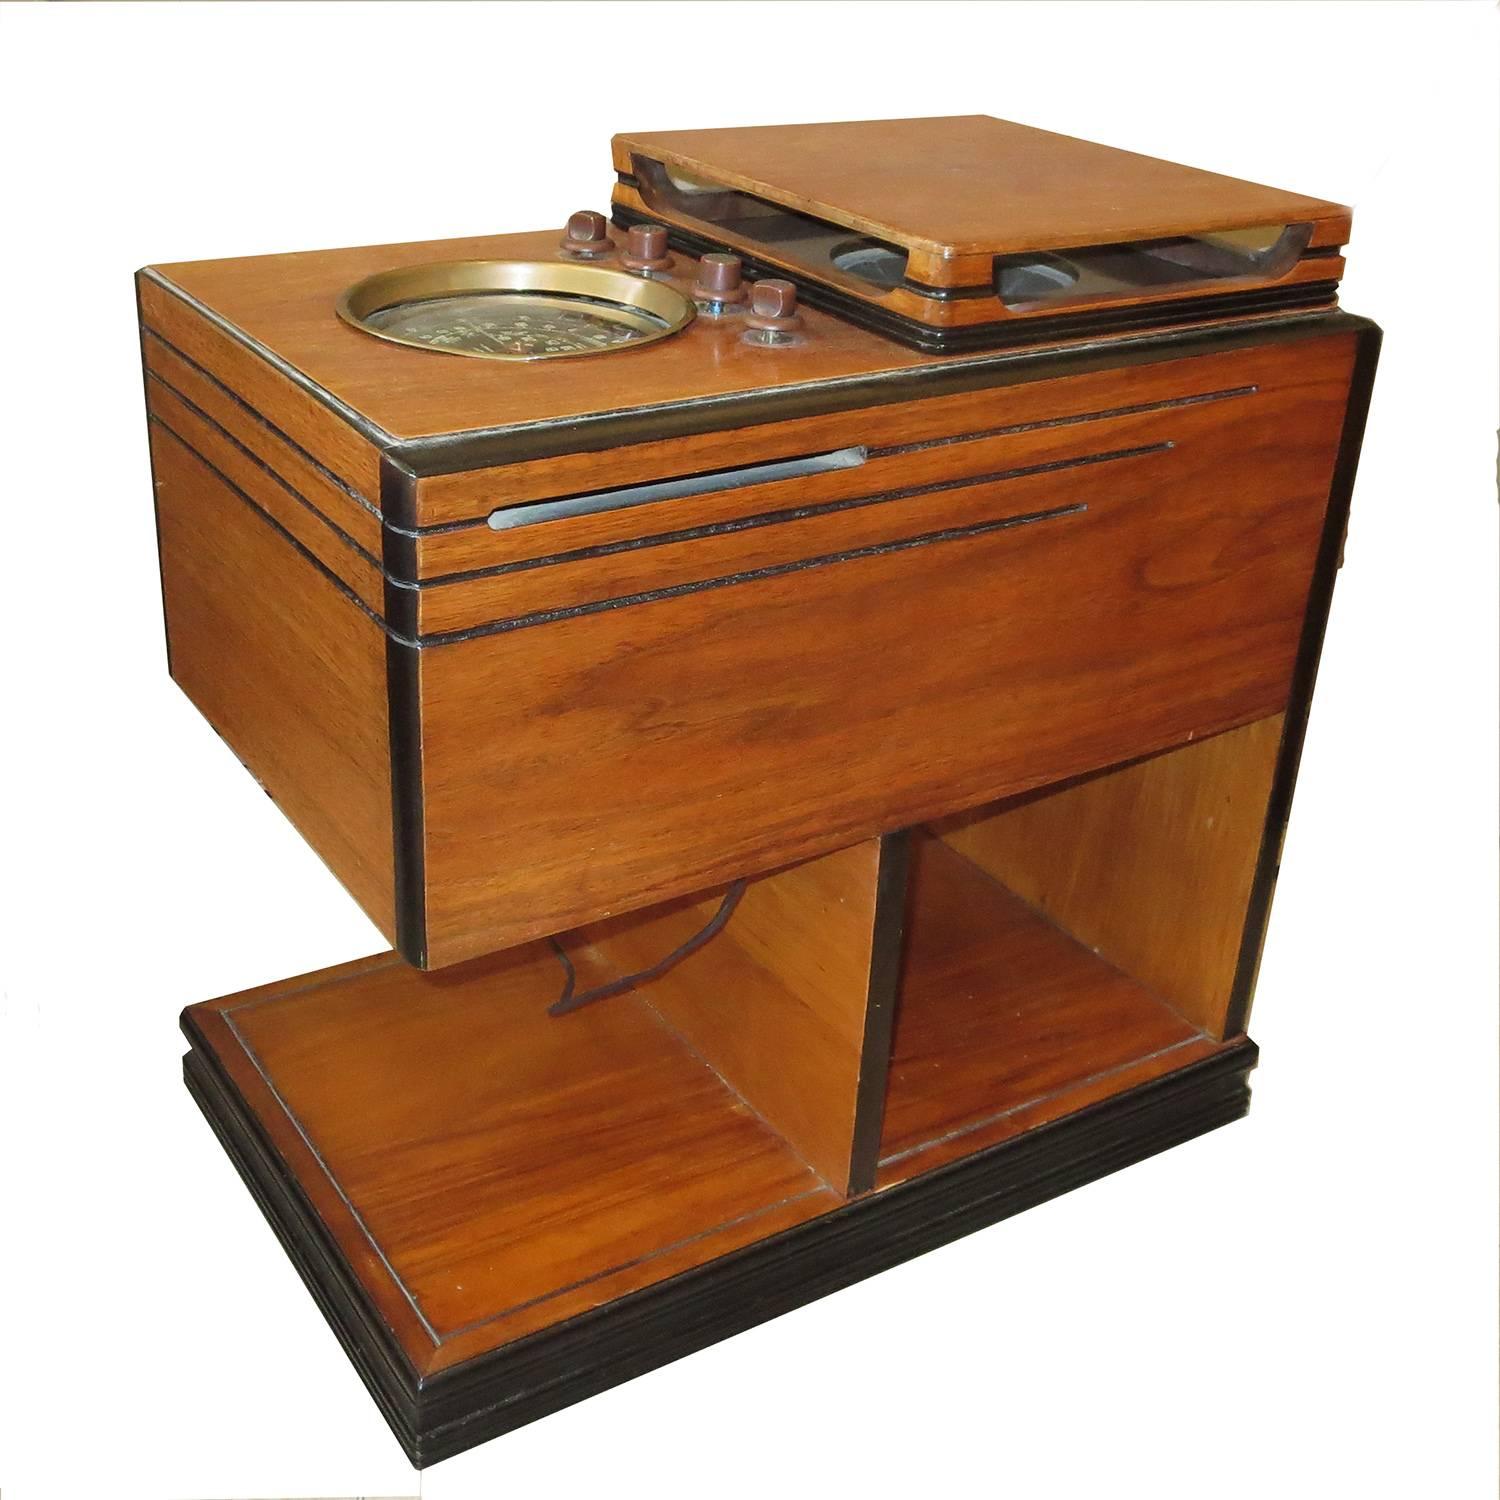 Most American households had only a radio for entertainment and news in the days before the advent of television. The living room had the large upright cabinet units, while smaller tabletop sets could be used in the bedrooms or kitchen. A little